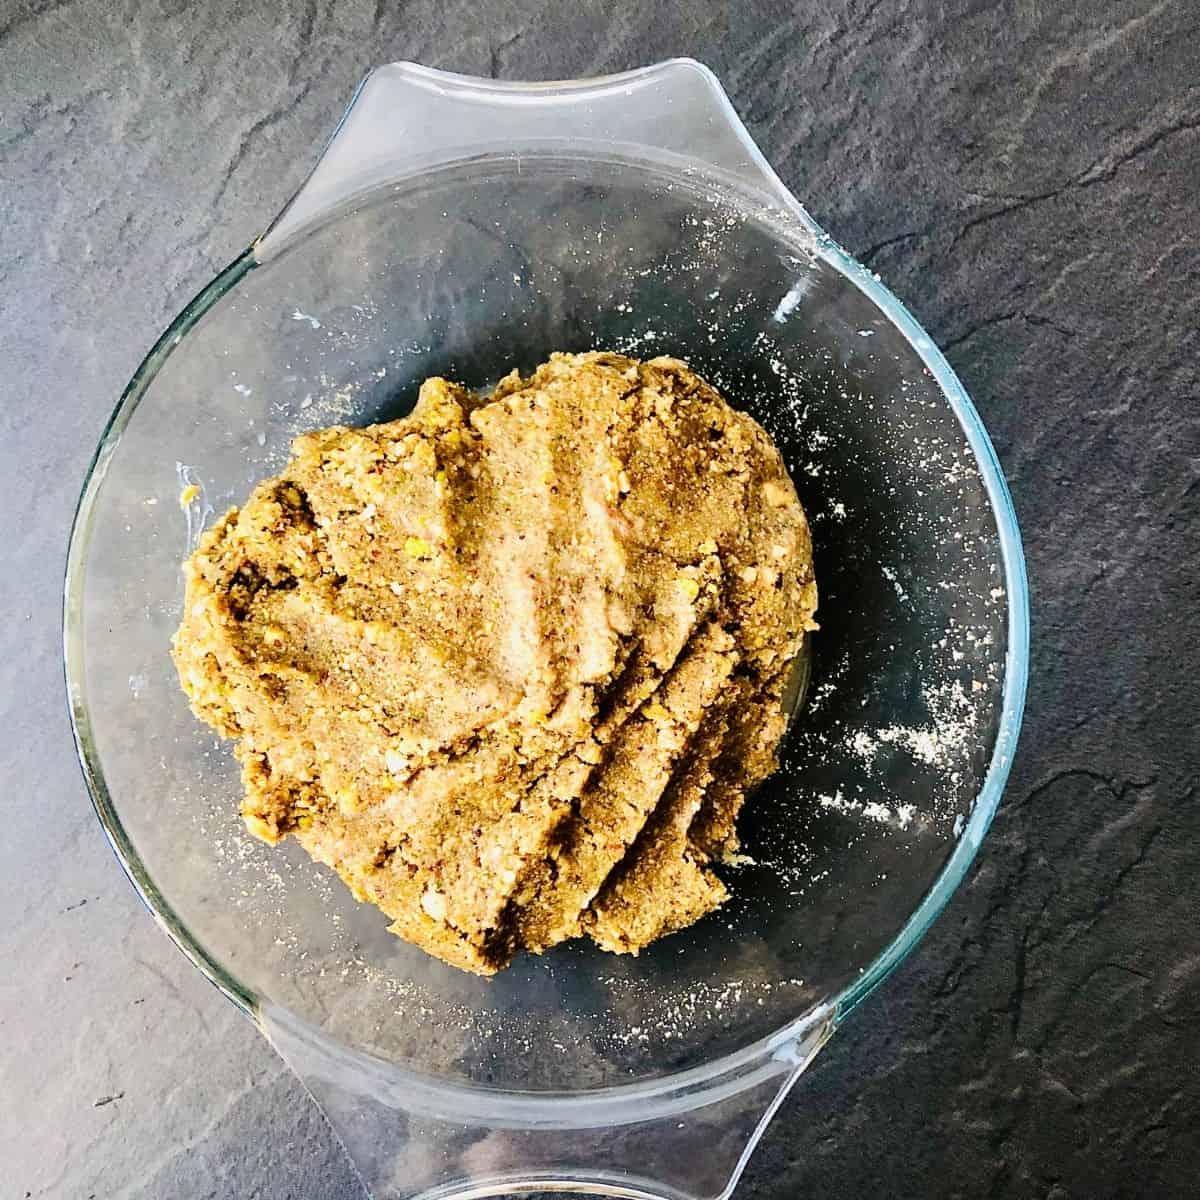 Thundai dry powder mixed together with Saltana paste in a glass dish